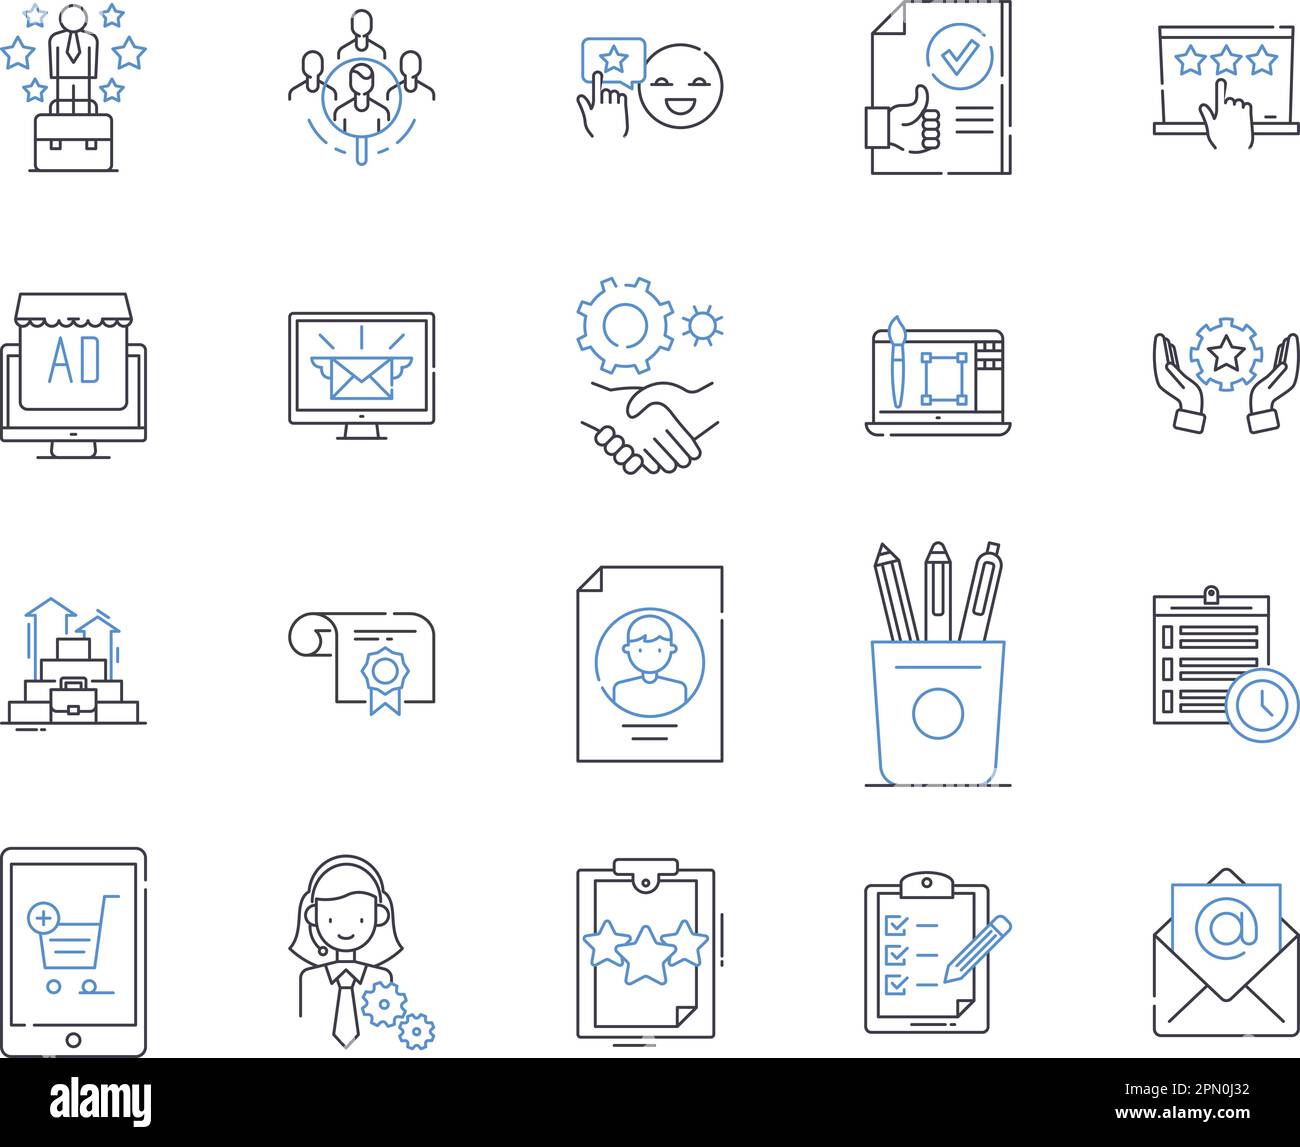 Marketing and concept outline icons collection. marketing, concept, strategy, planning, segmentation, targeting, positioning vector and illustration Stock Vector